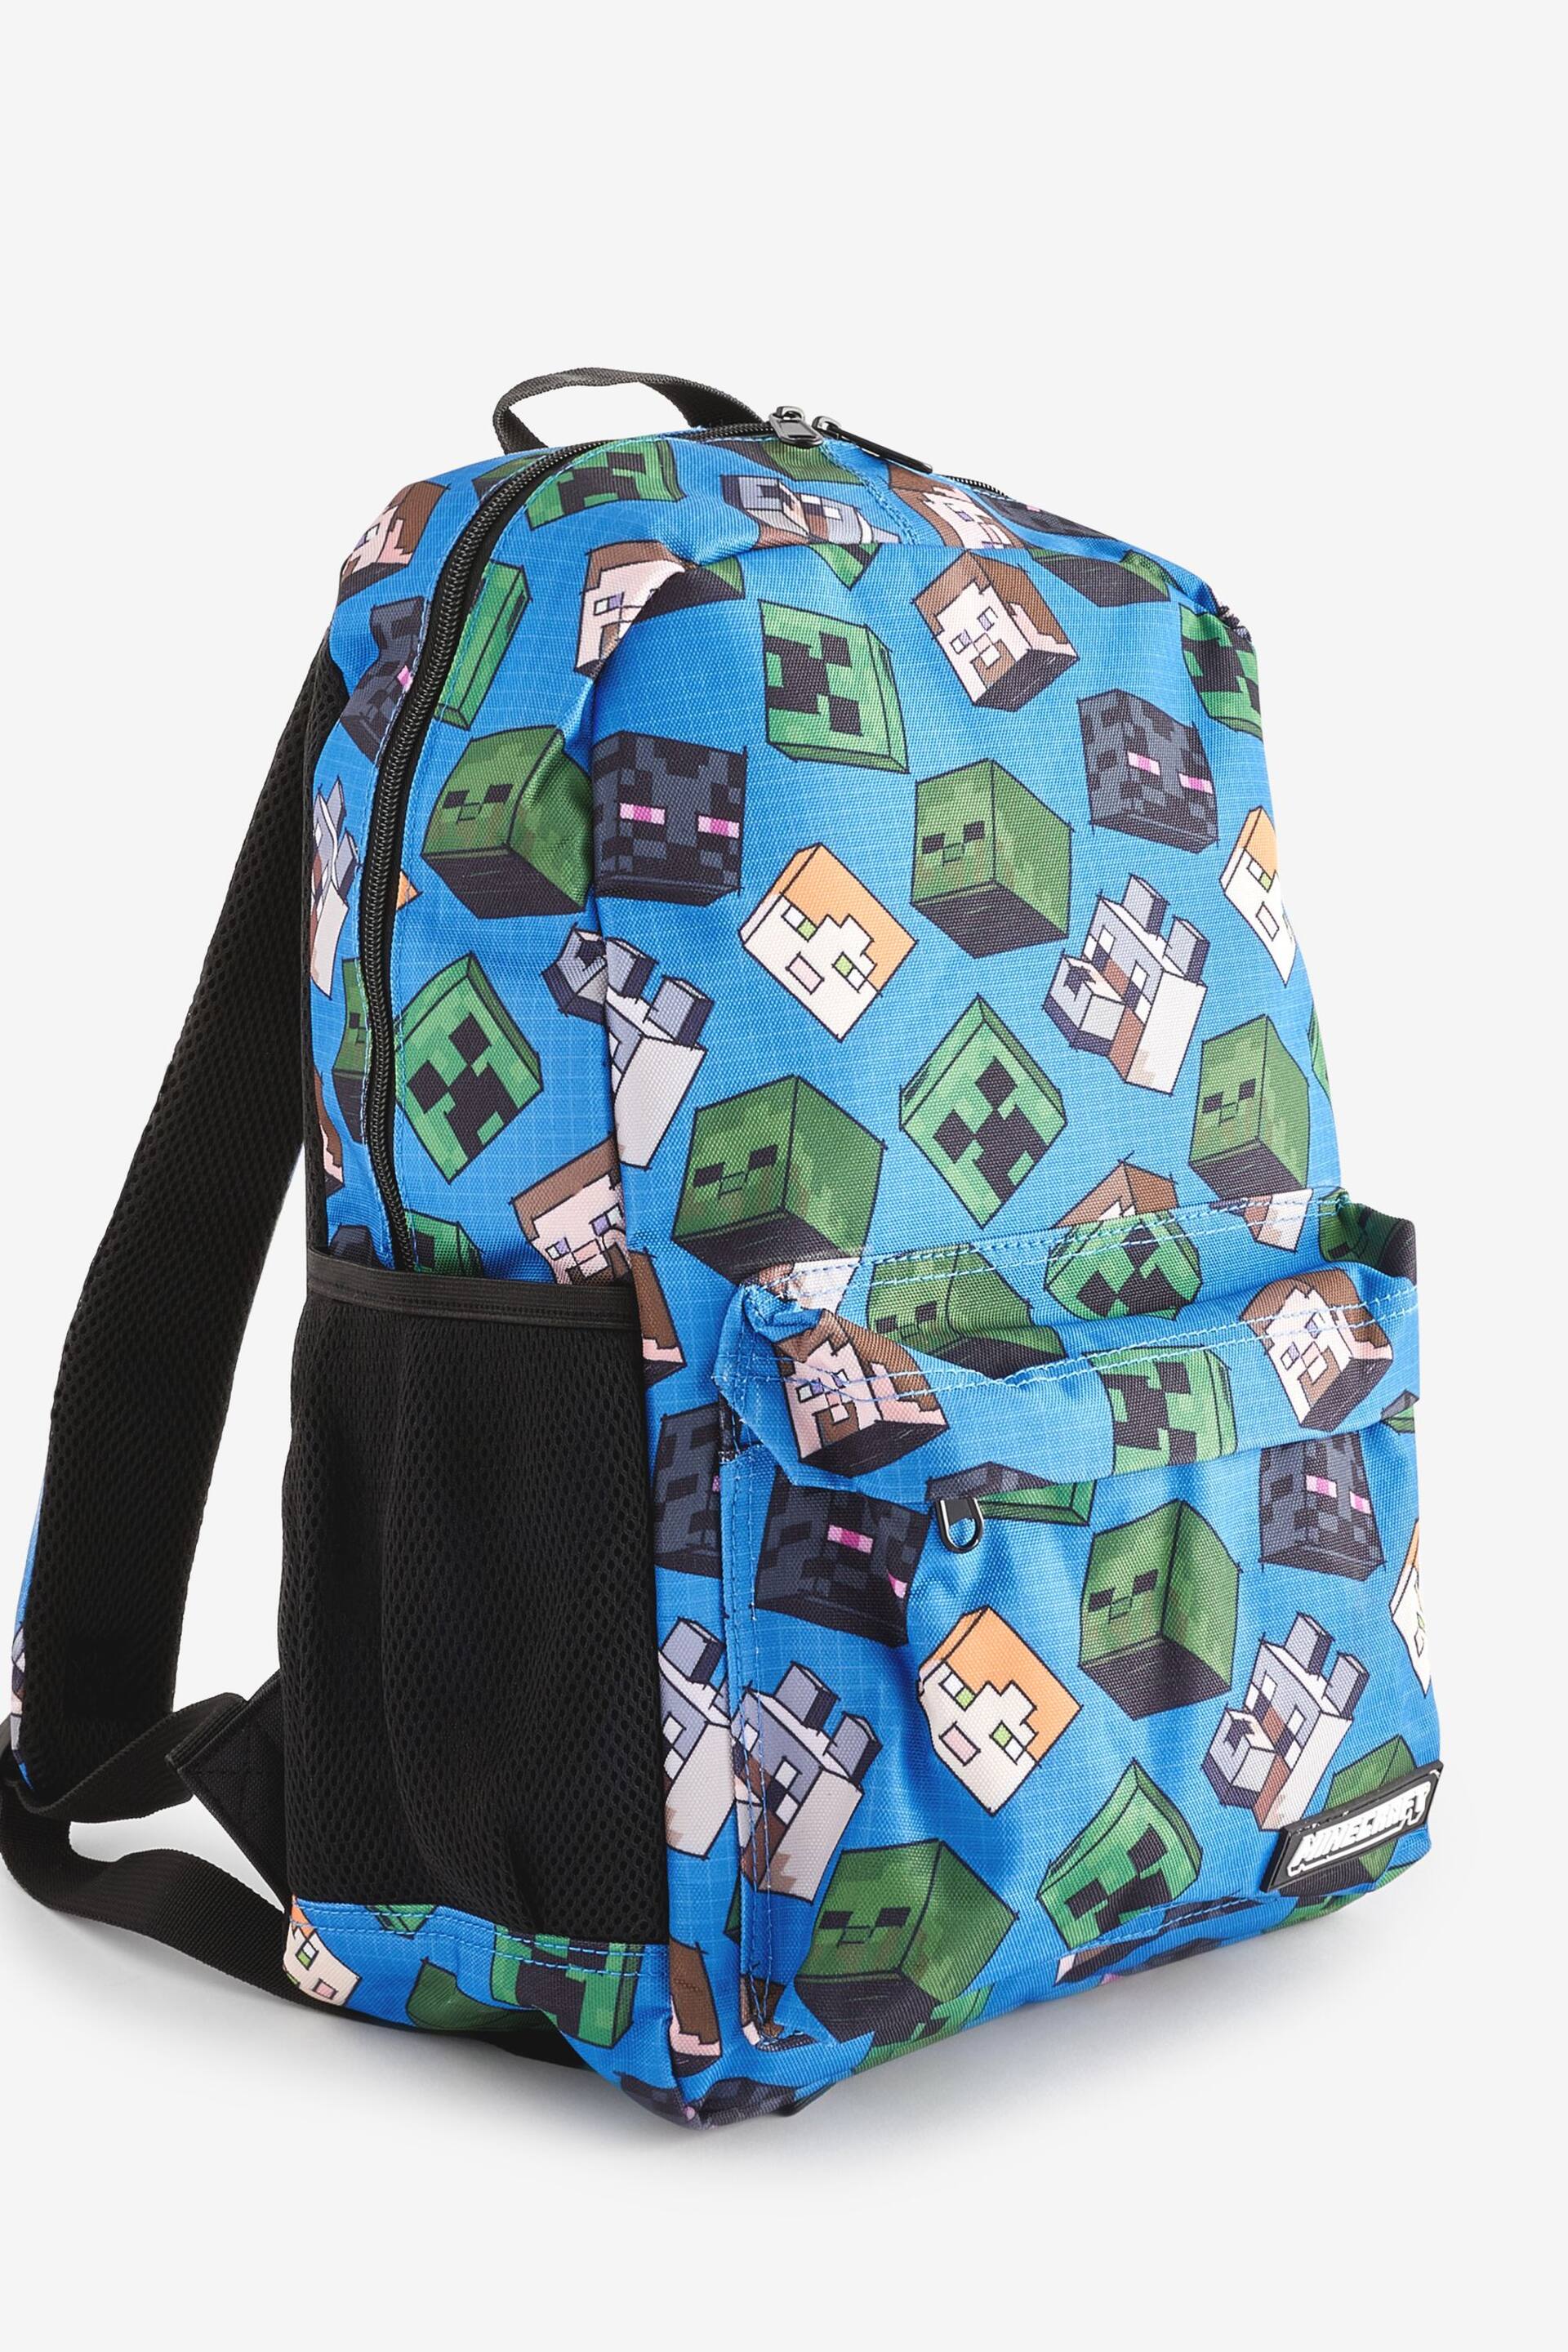 Minecraft Blue Backpack - Image 4 of 5